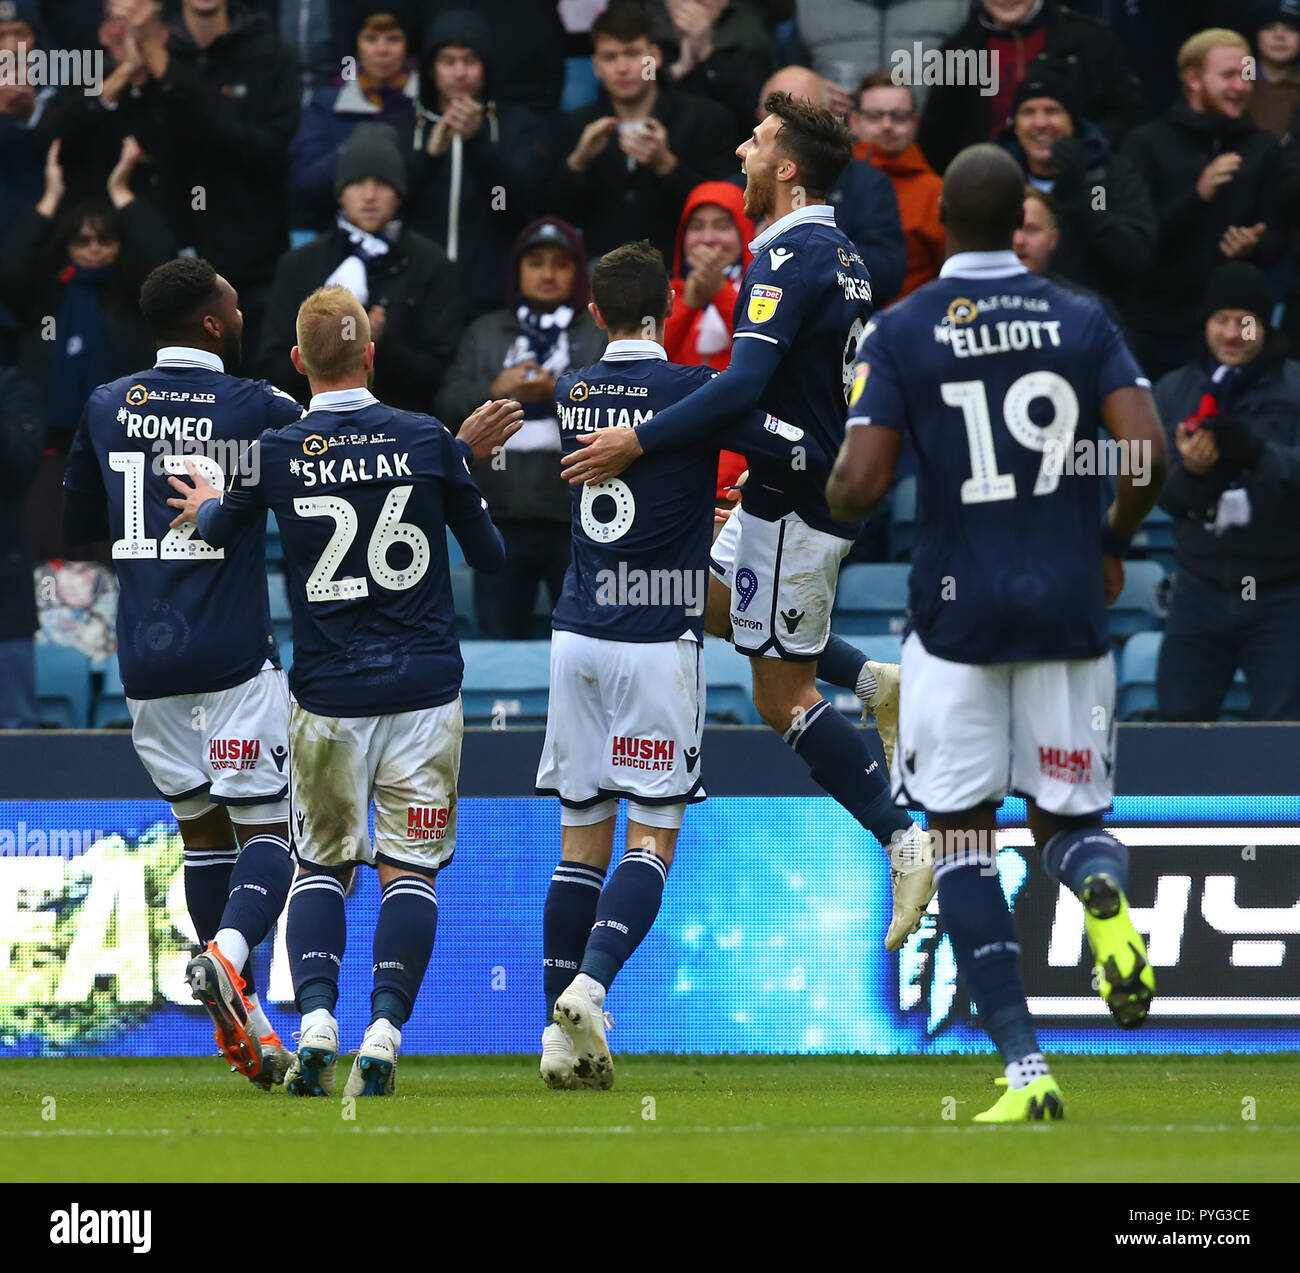 London, UK. 27 October, 2018 Lee Gregory of Millwallcelebrates his goal during Sky Bet Championship match between Millwall and Ipswich Town at The Den Ground, London. Credit Action Foto Sport   FA Premier League and Football League images are subject to DataCo Licence EDITORIAL USE ONLY No use with unauthorised audio, video, data, fixture lists (outside the EU), club/league logos or 'live' services. Online in-match use limited to 45 images (+15 in extra time). No use to emulate moving images. Credit: Action Foto Sport/Alamy Live News Stock Photo